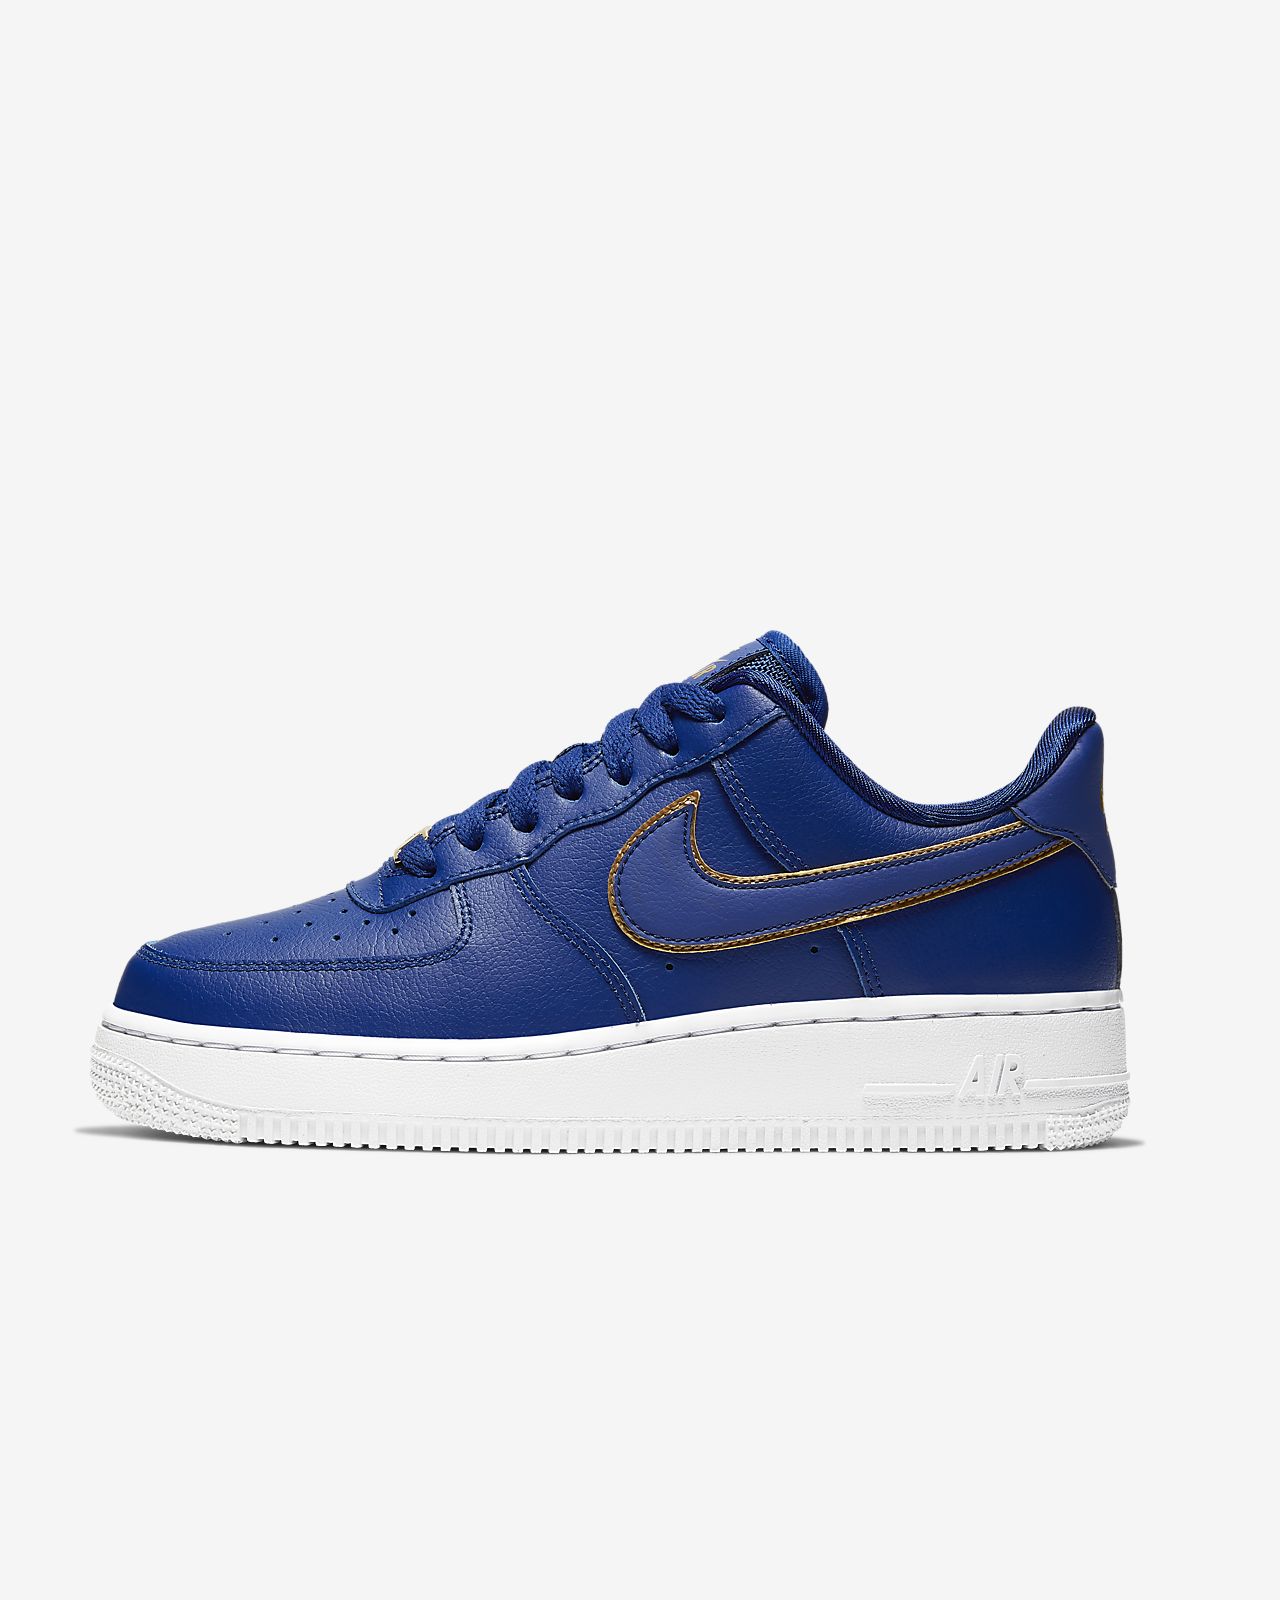 blue and gold nike air force 1